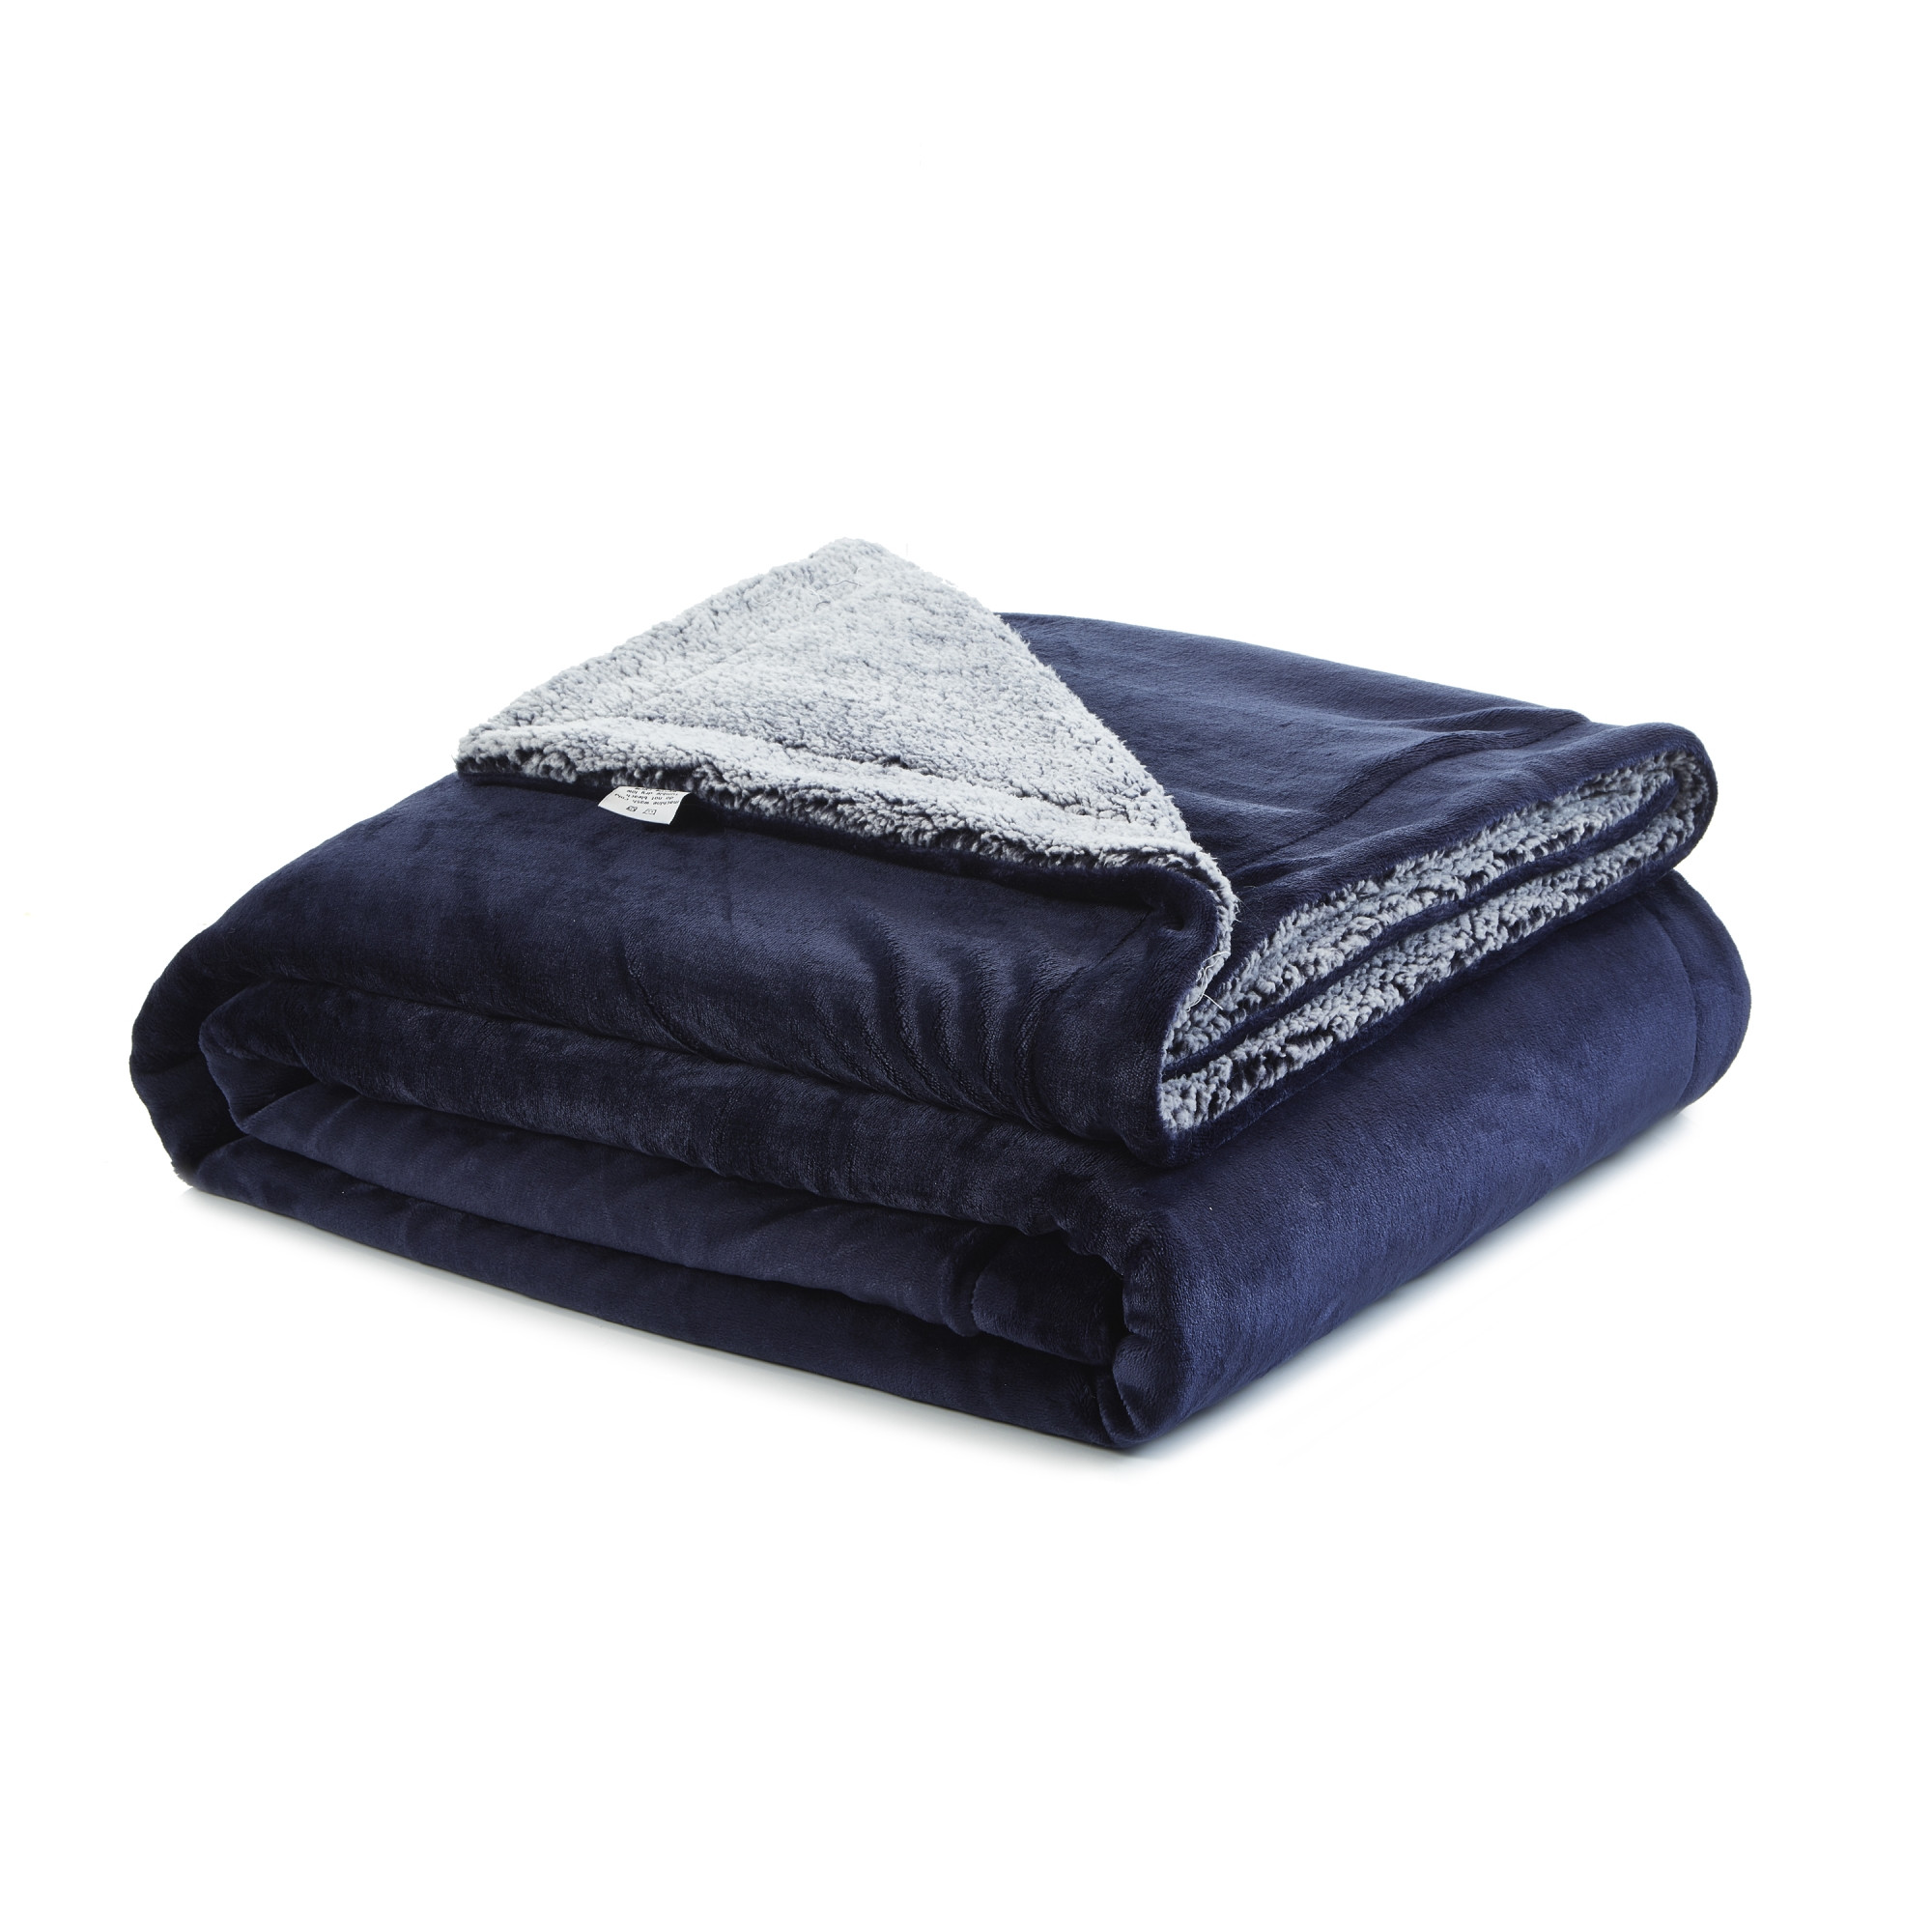 Navy Blue Knitted PolYester Solid Color Plush Queen Blanket-531200-1